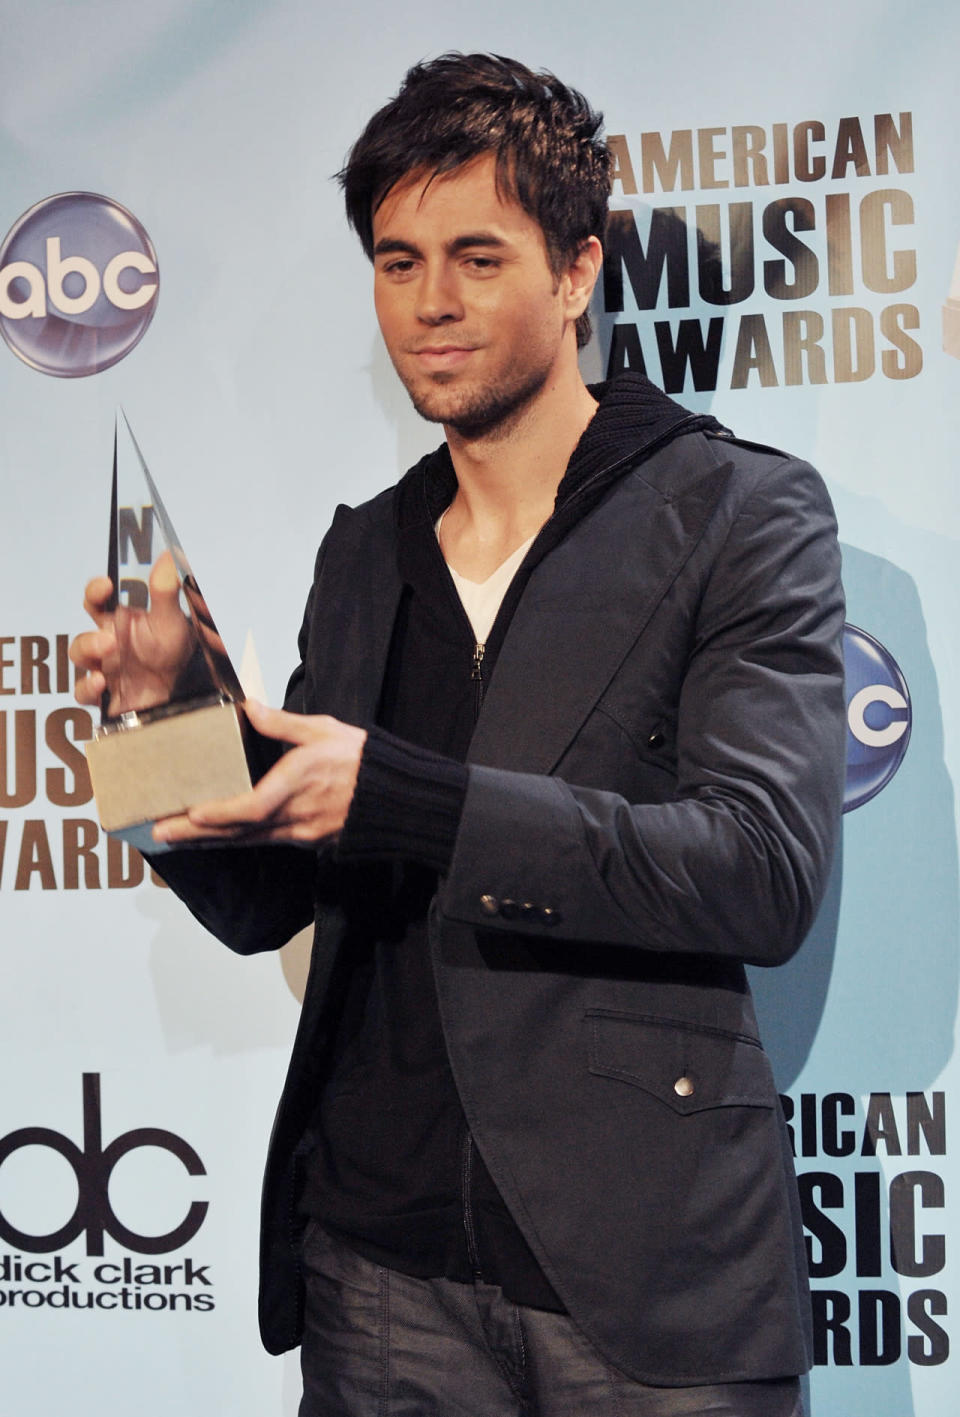 Enrique Iglesias may win for the seventh time in the category of Favorite Artist—Latin